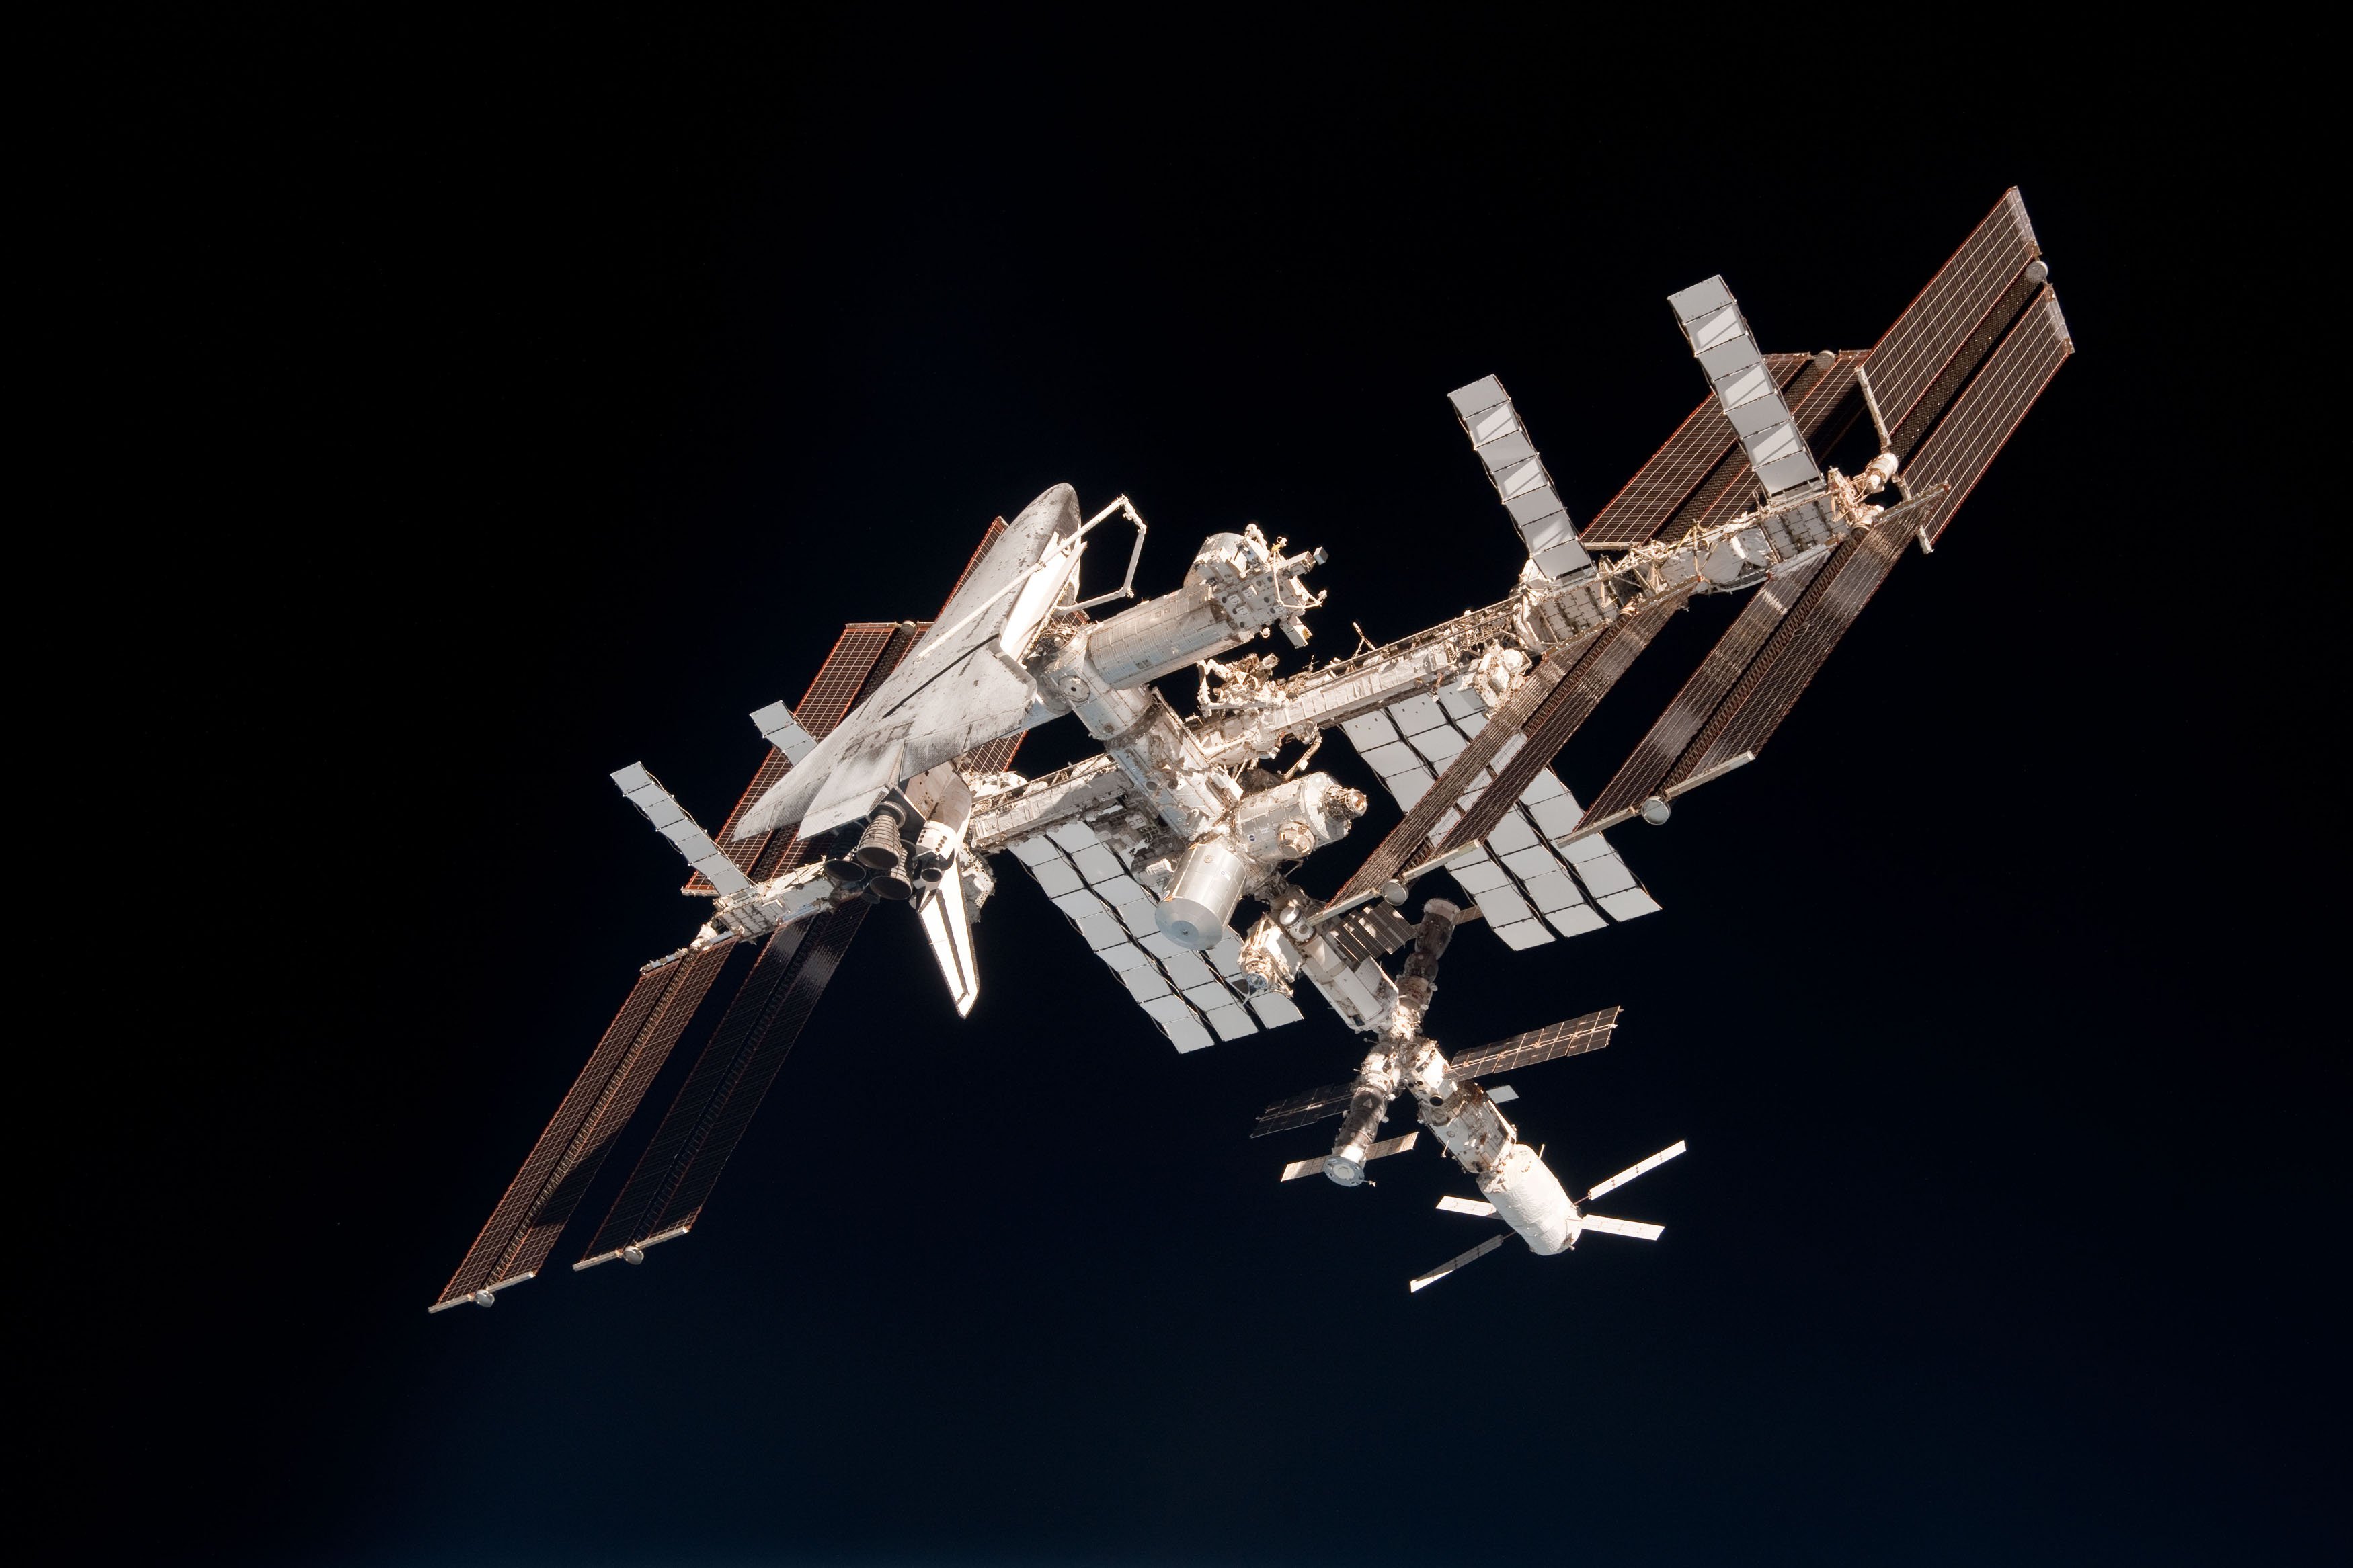 IN SPACE - MAY 23: In this handout image provided by the European Space Agency (ESA) and NASA, the International Space Station and the docked space shuttle Endeavour orbit Earth during Endeavour's final sortie on May 23, 2011 in Space. (Paolo Nespoli - ESA/NASA via Getty Images)